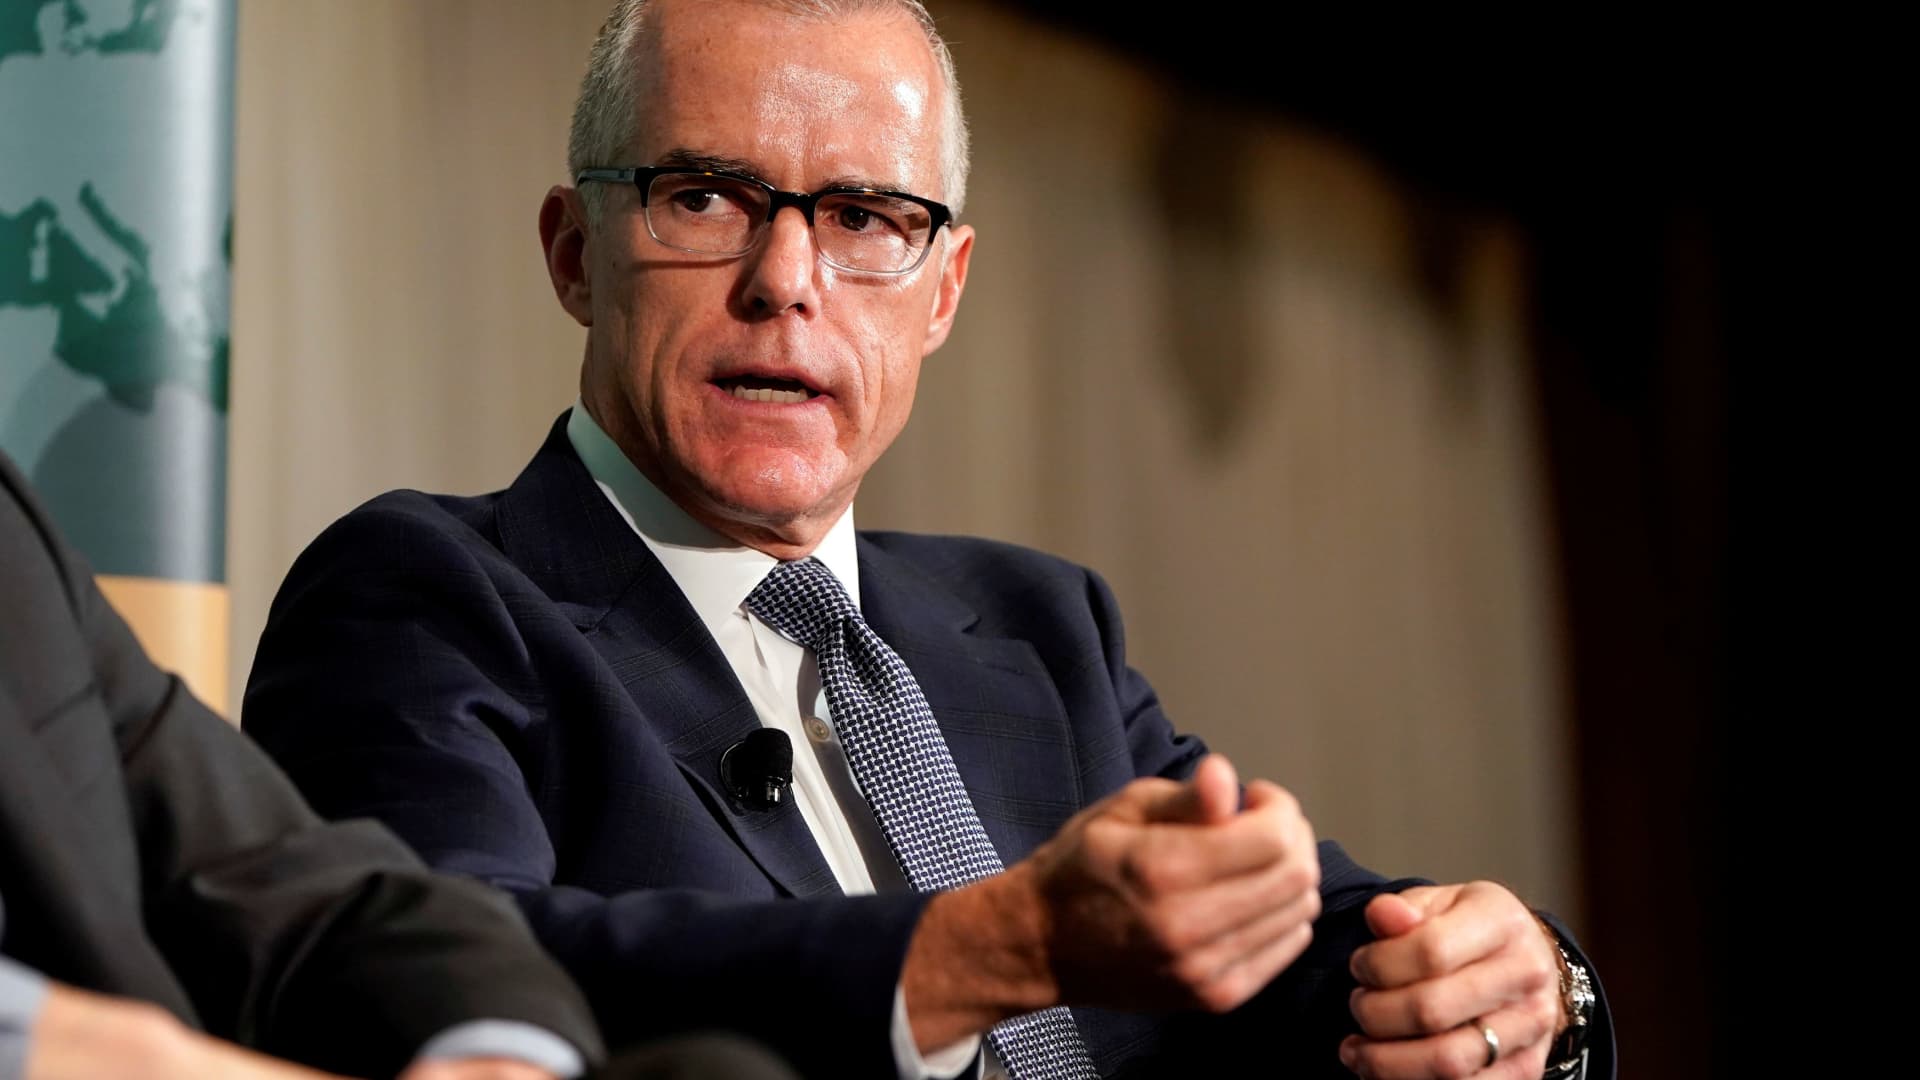 Former acting FBI director Andrew McCabe speaks during a forum on election security titled, “2020 Vision: Intelligence and the U.S. Presidential Election” at the National Press Club in Washington, October 30, 2019.